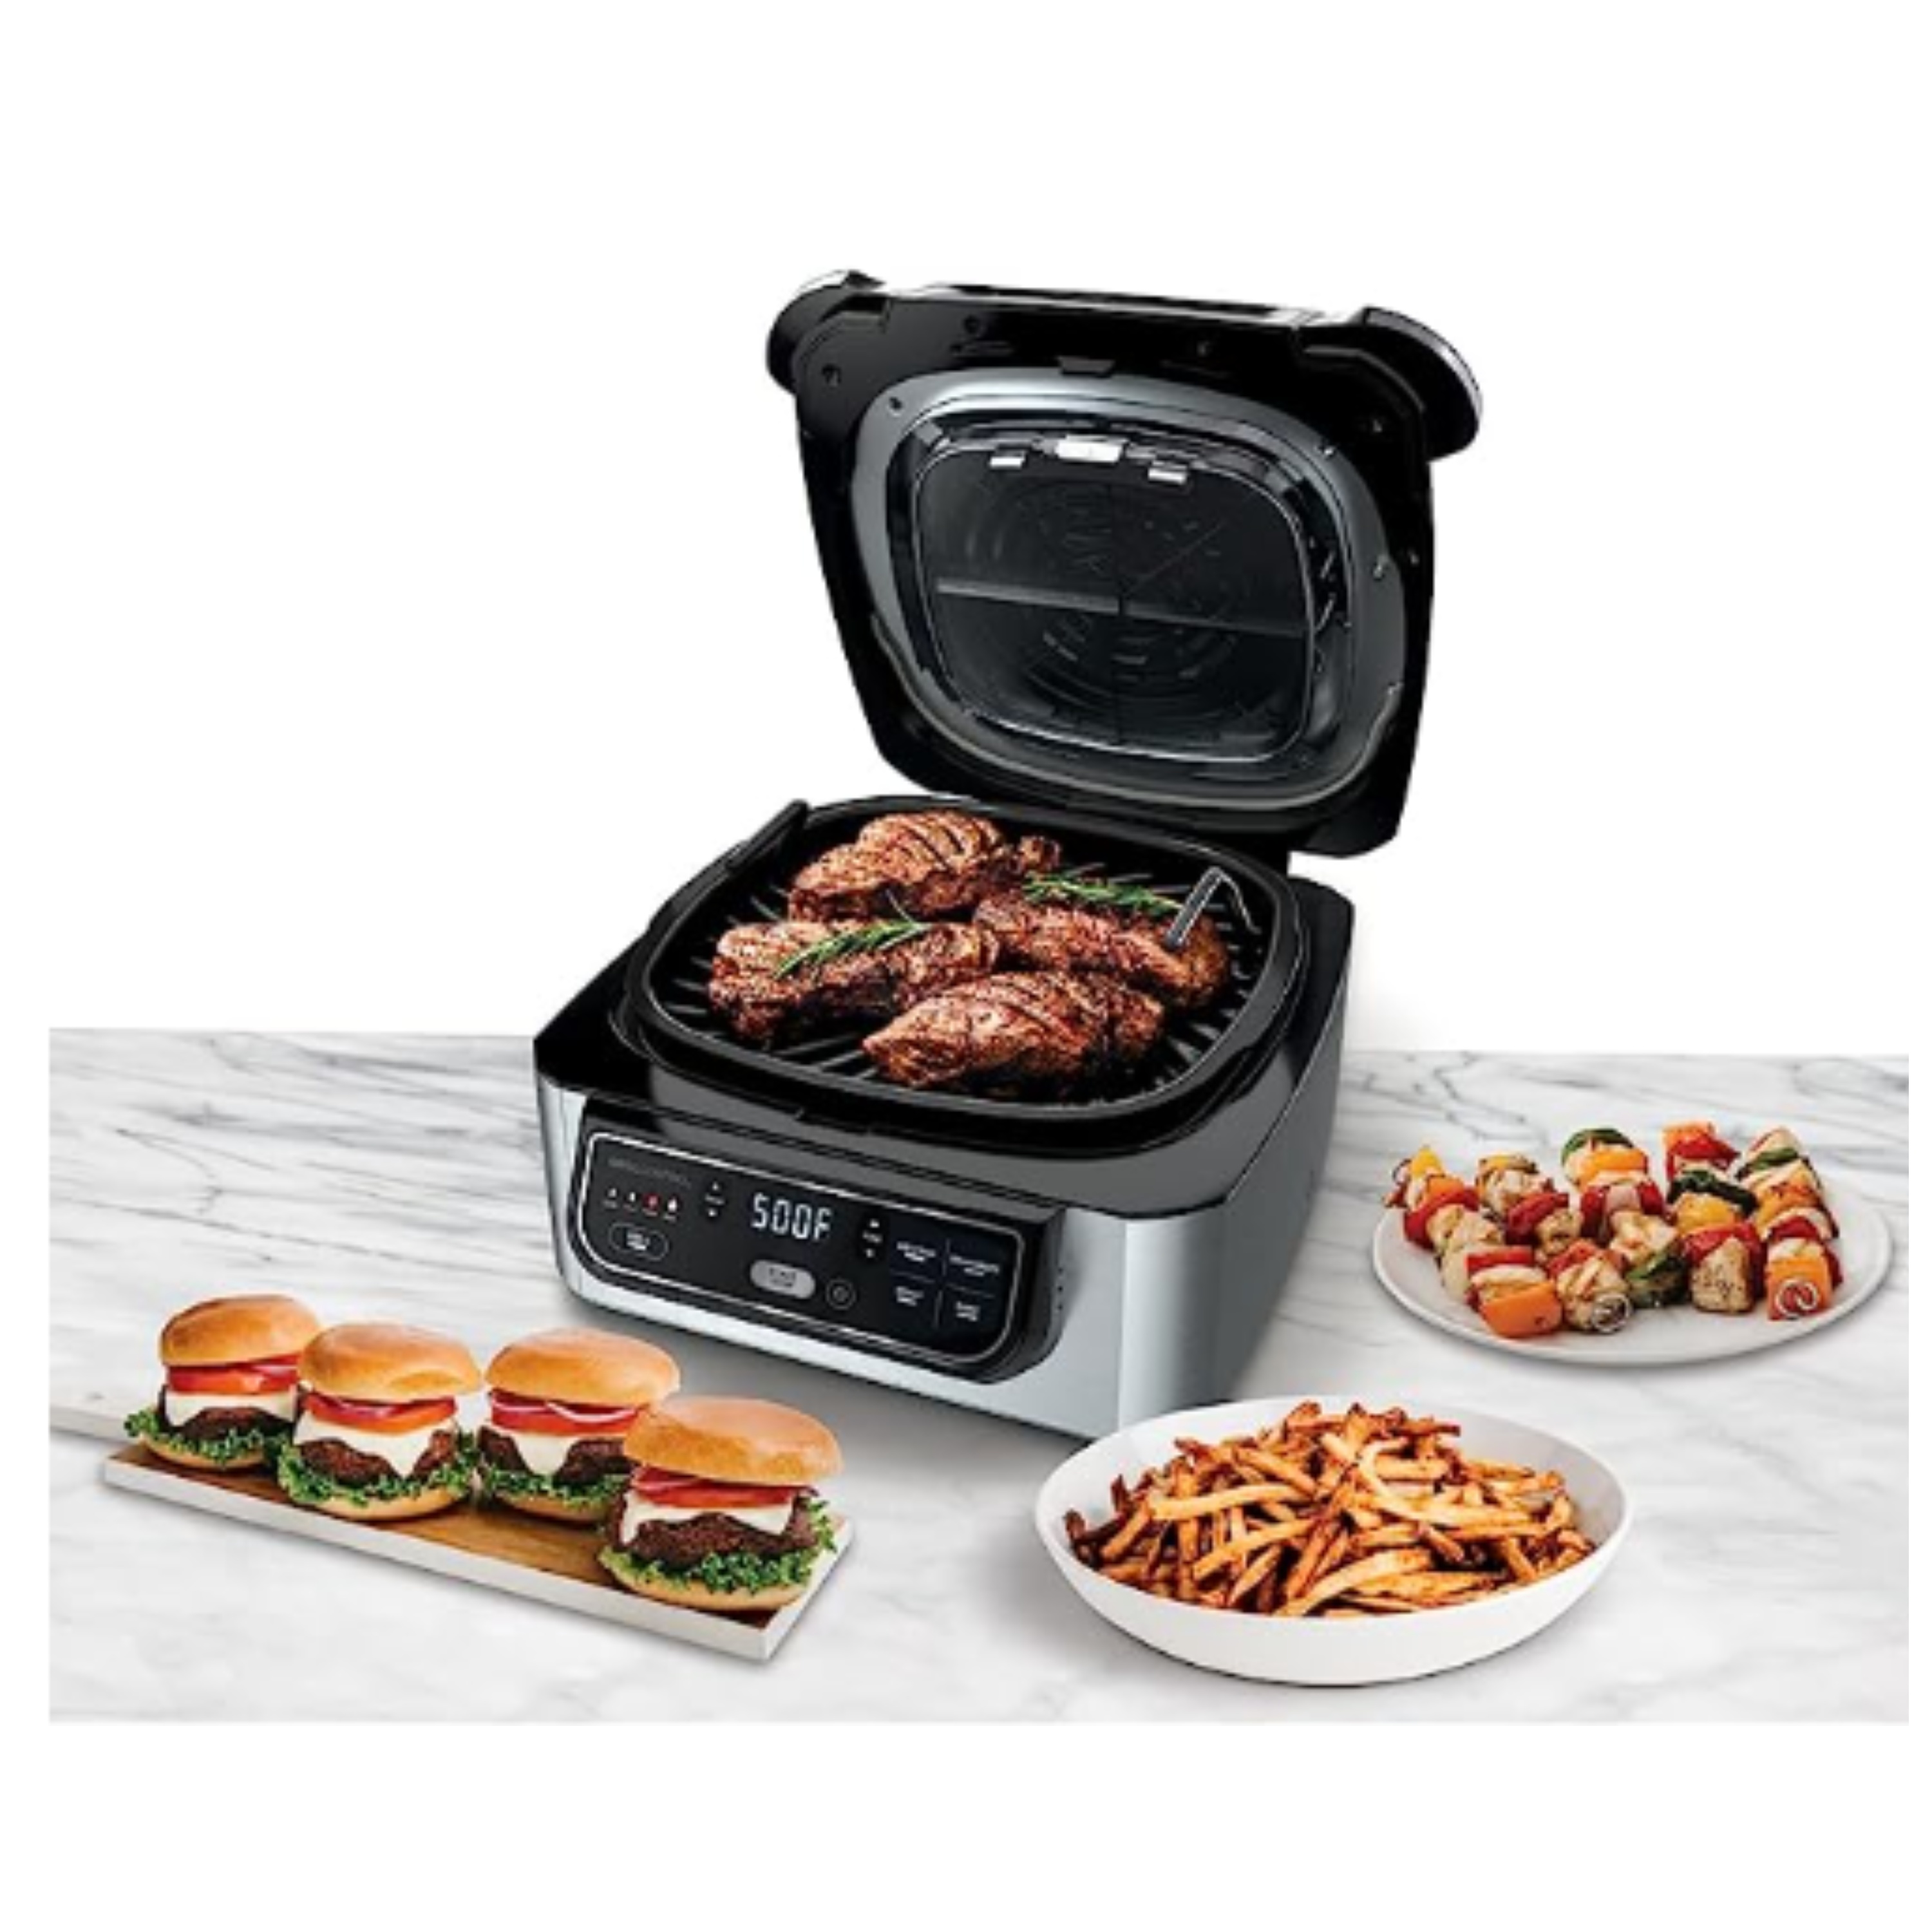 Save up to $120 on Ninja's 6-in-1 Foodi Air Fryer Grill with